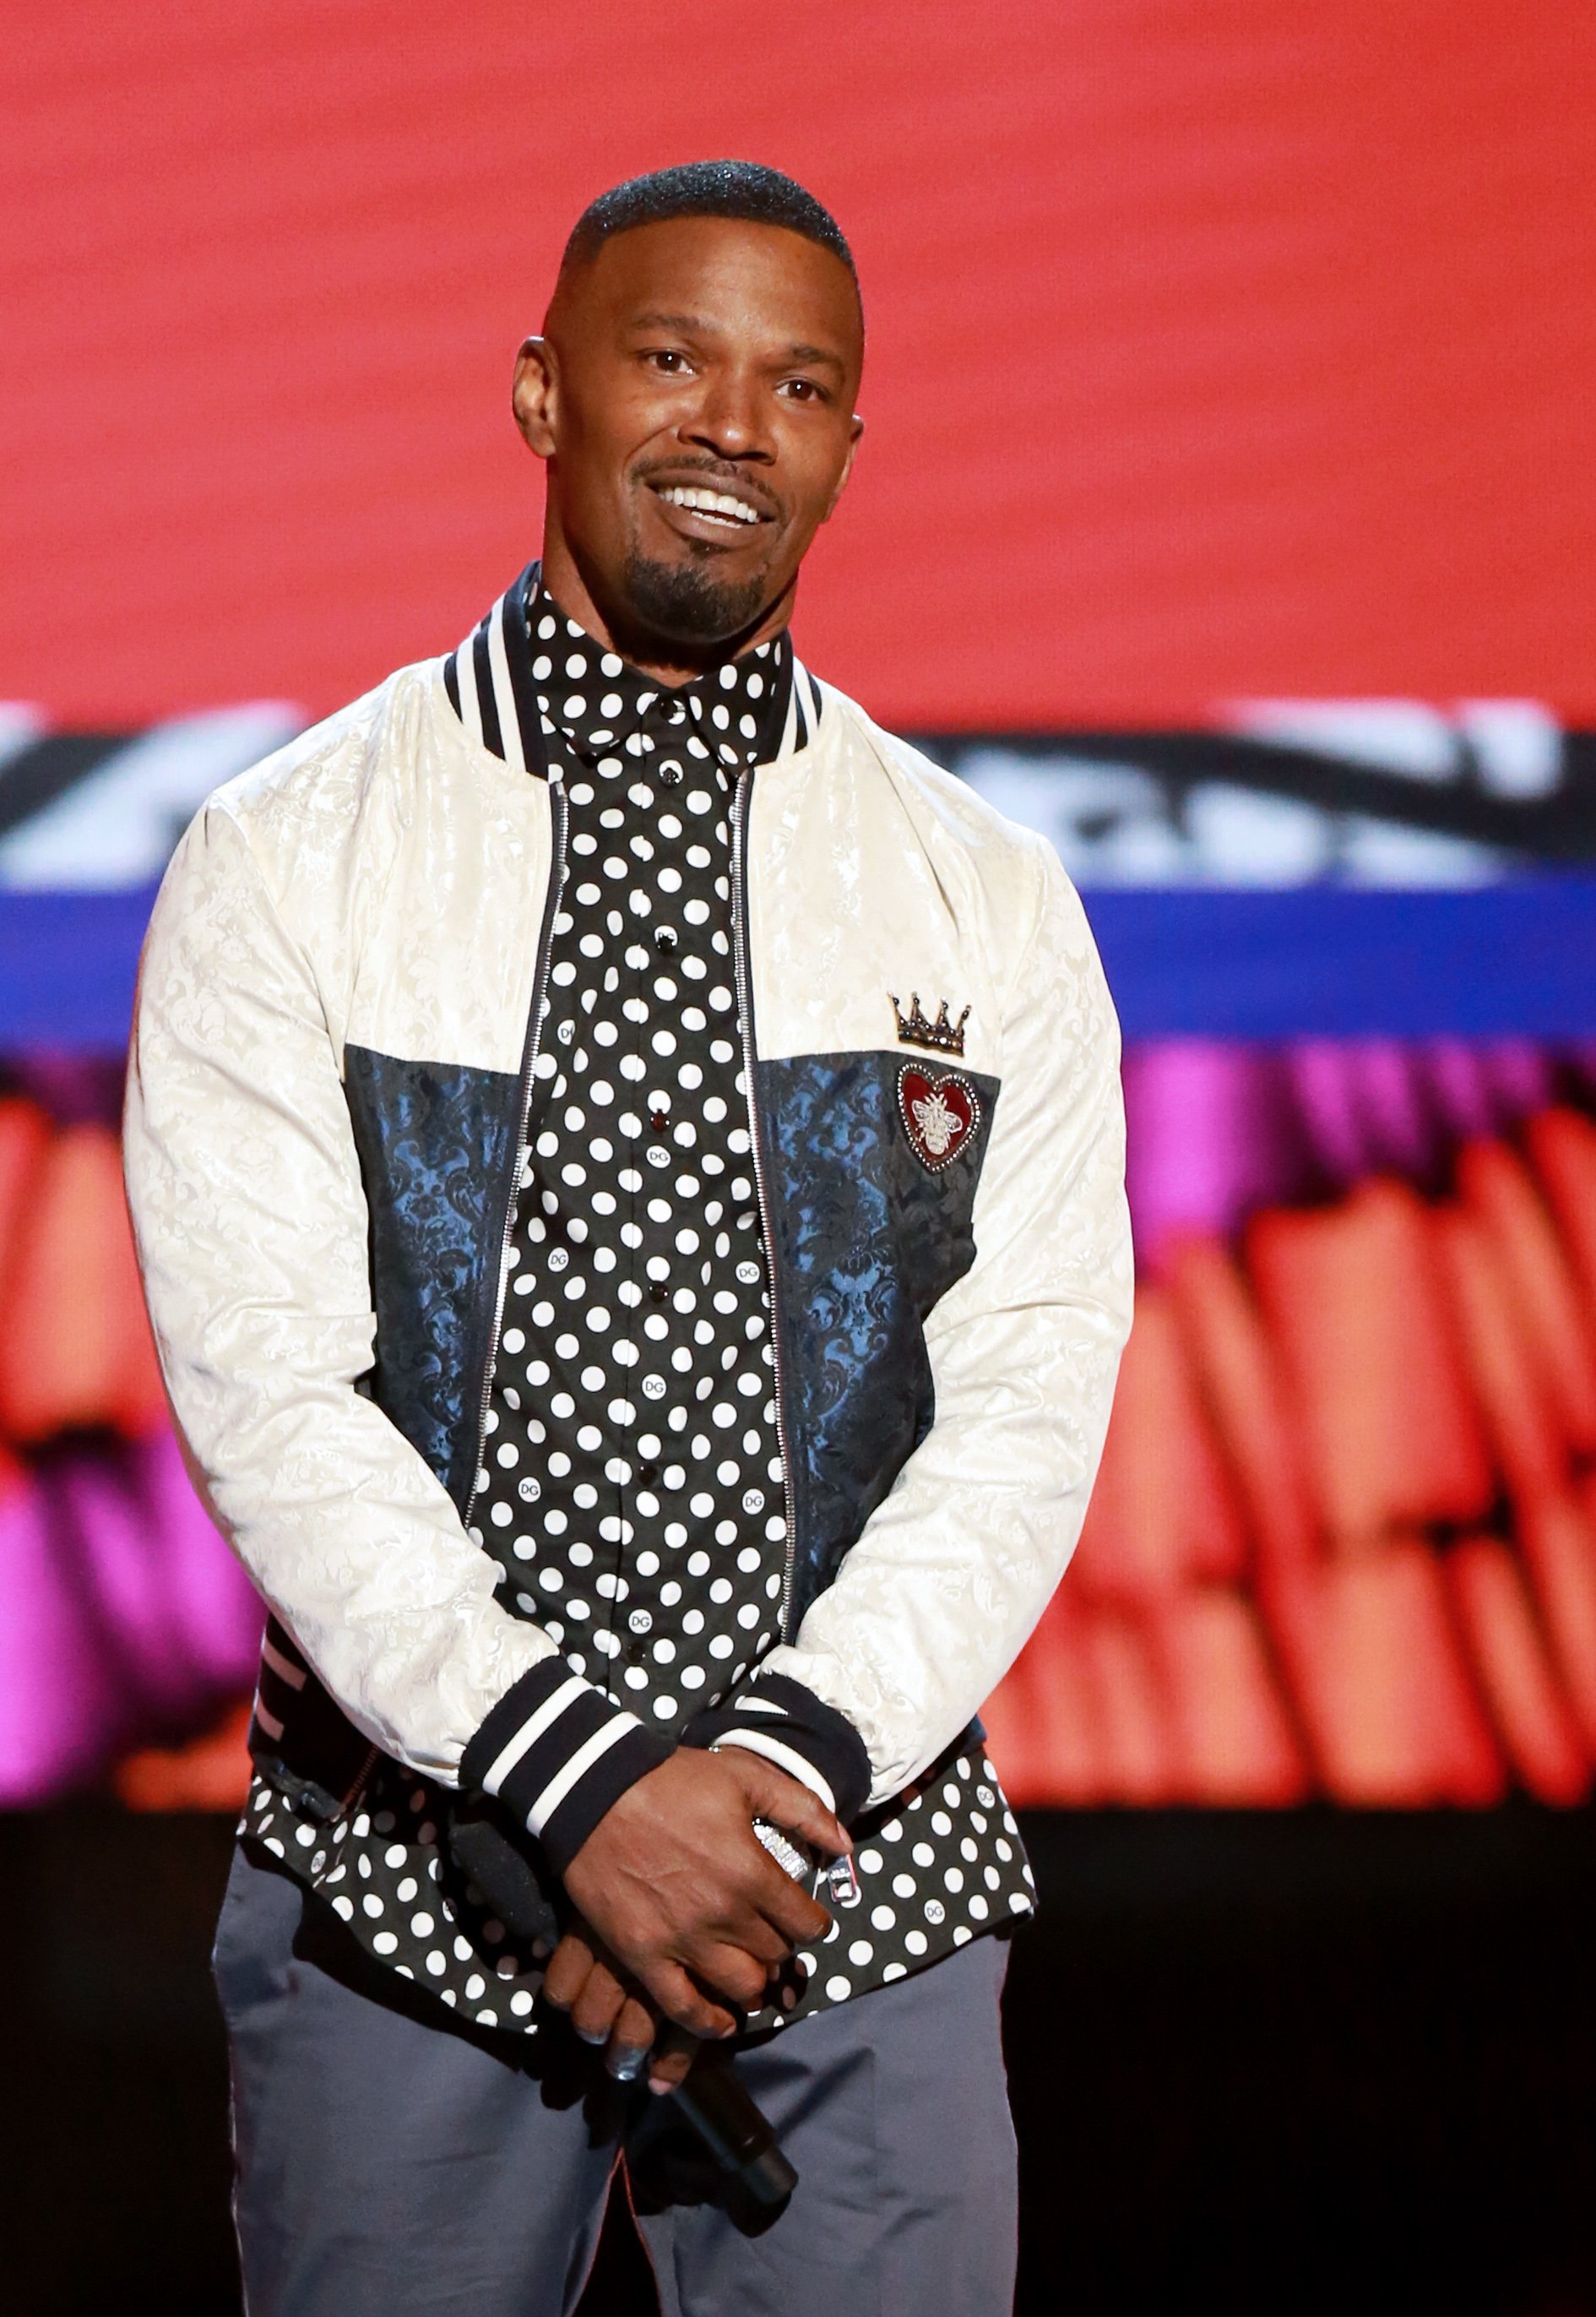 Jamie Foxx onstage at the BET Awards in Los Angeles, California on June 24, 2018 | Photo: Getty Images